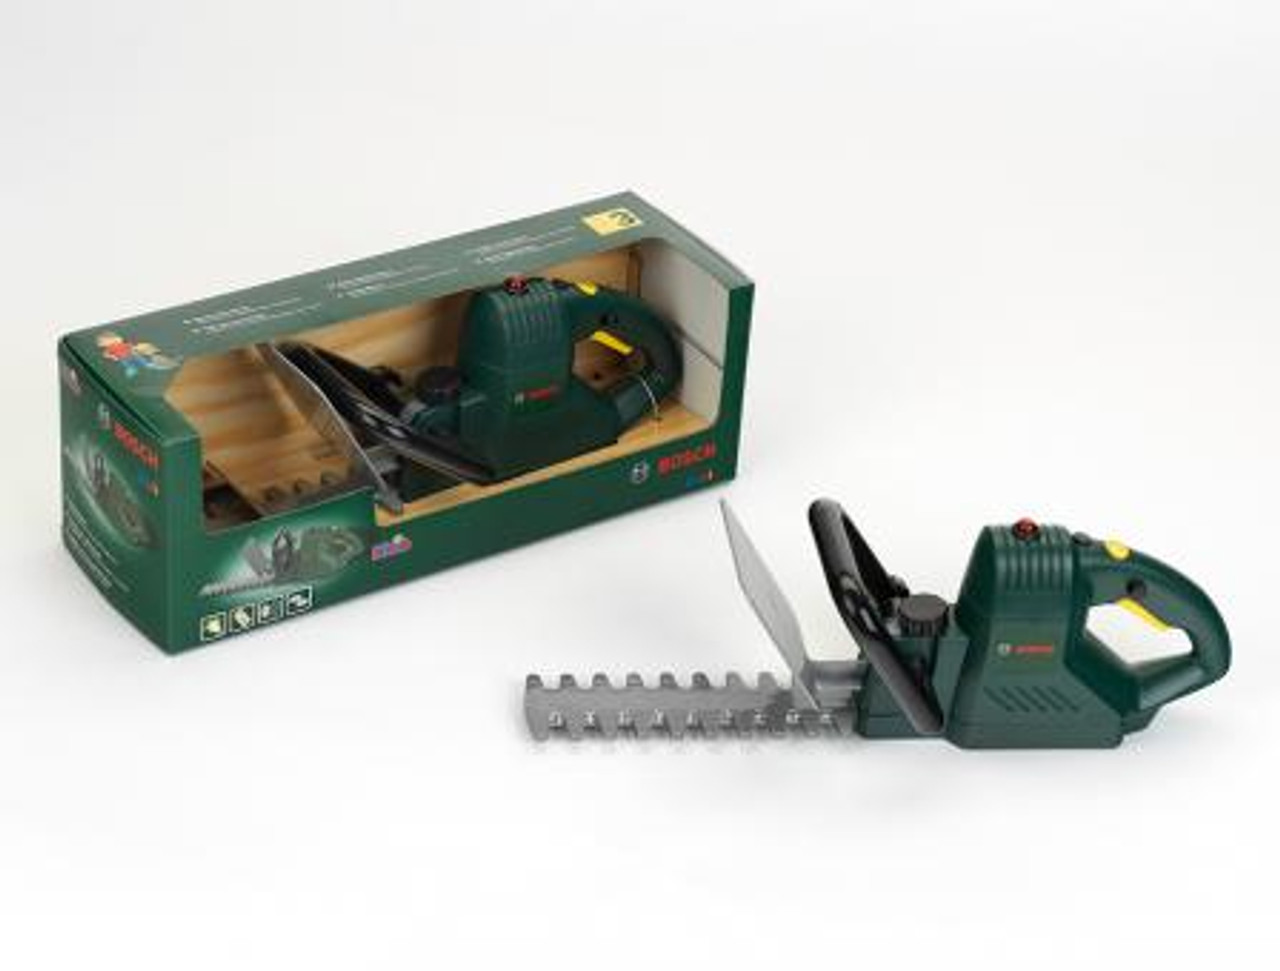 battery for bosch hedge trimmer